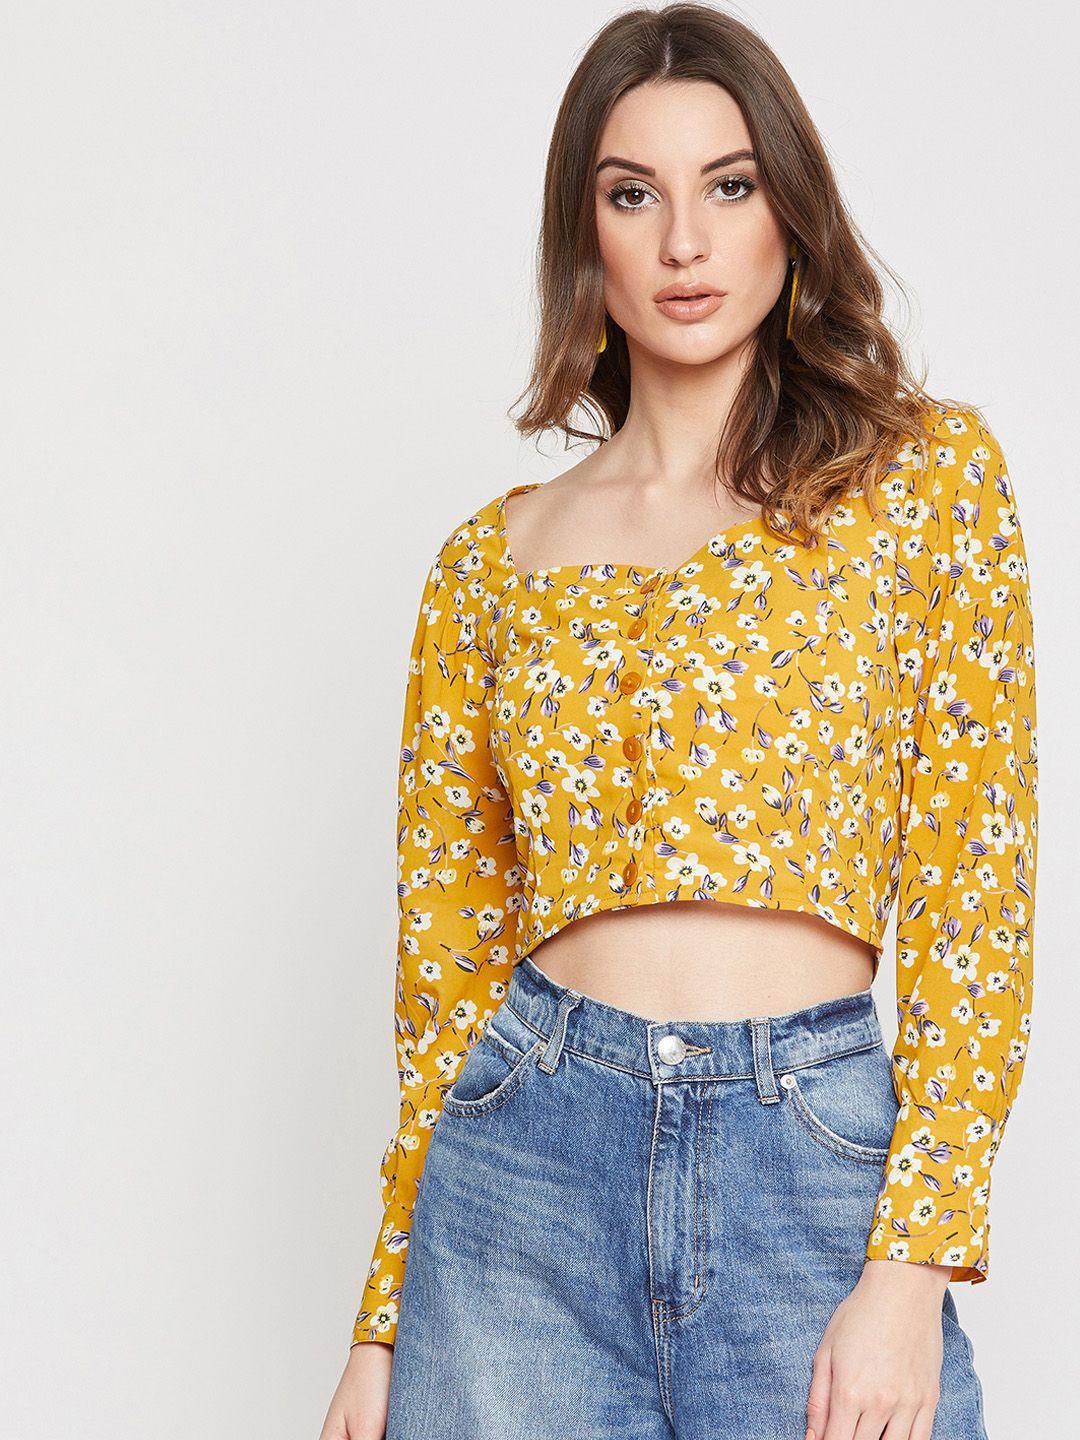 marie-claire-mustard-yellow-floral-print-crop-top